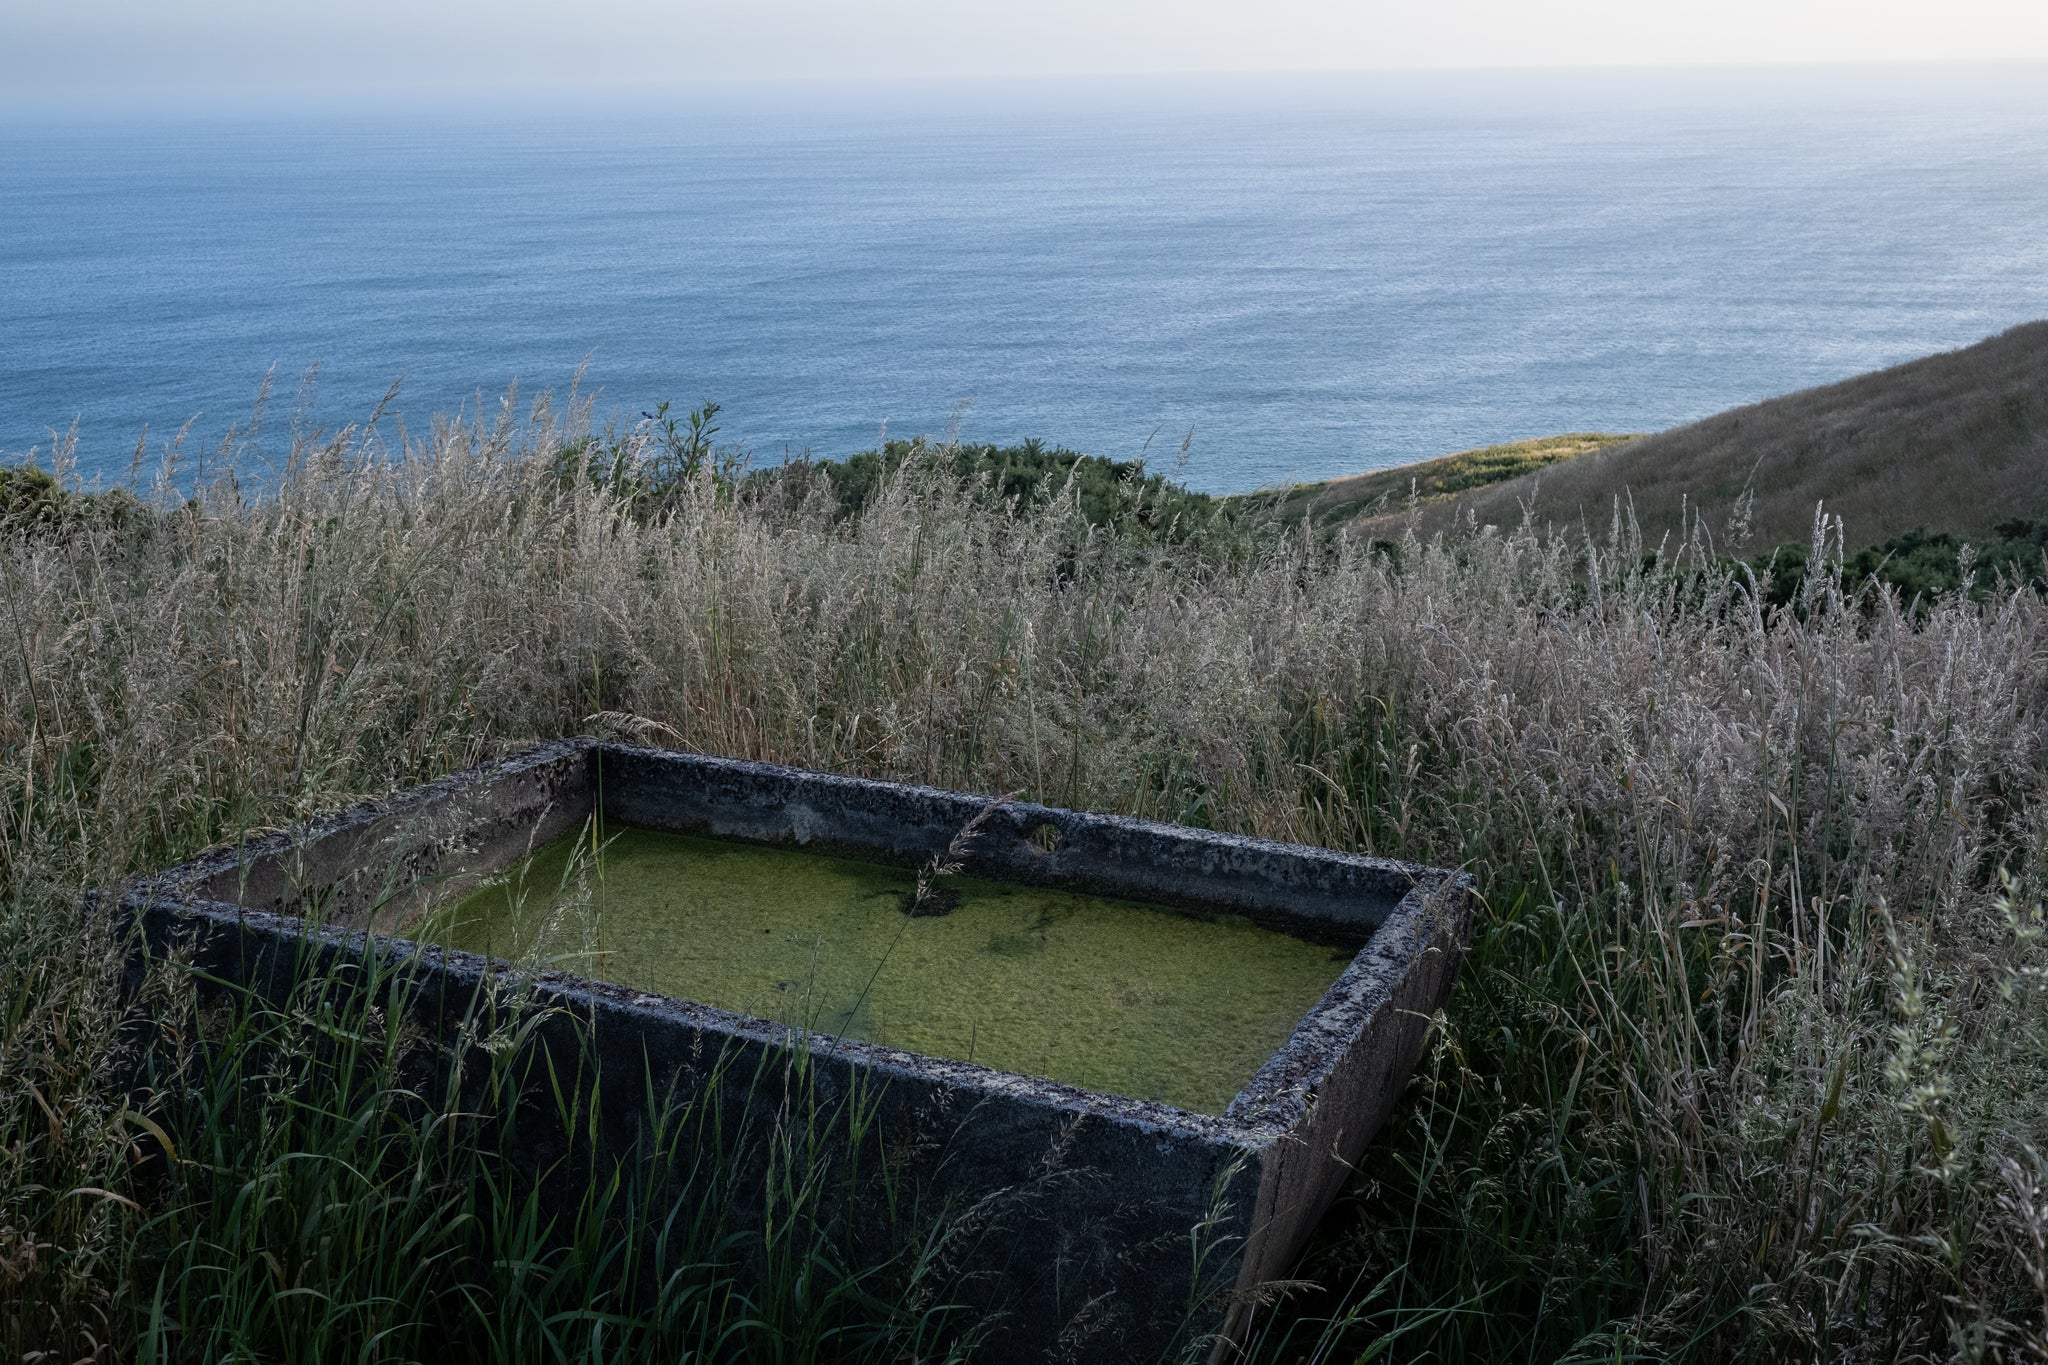 Large water trough on side of cliff, on farm land. Surrounded by long grass. Ocean in background. 